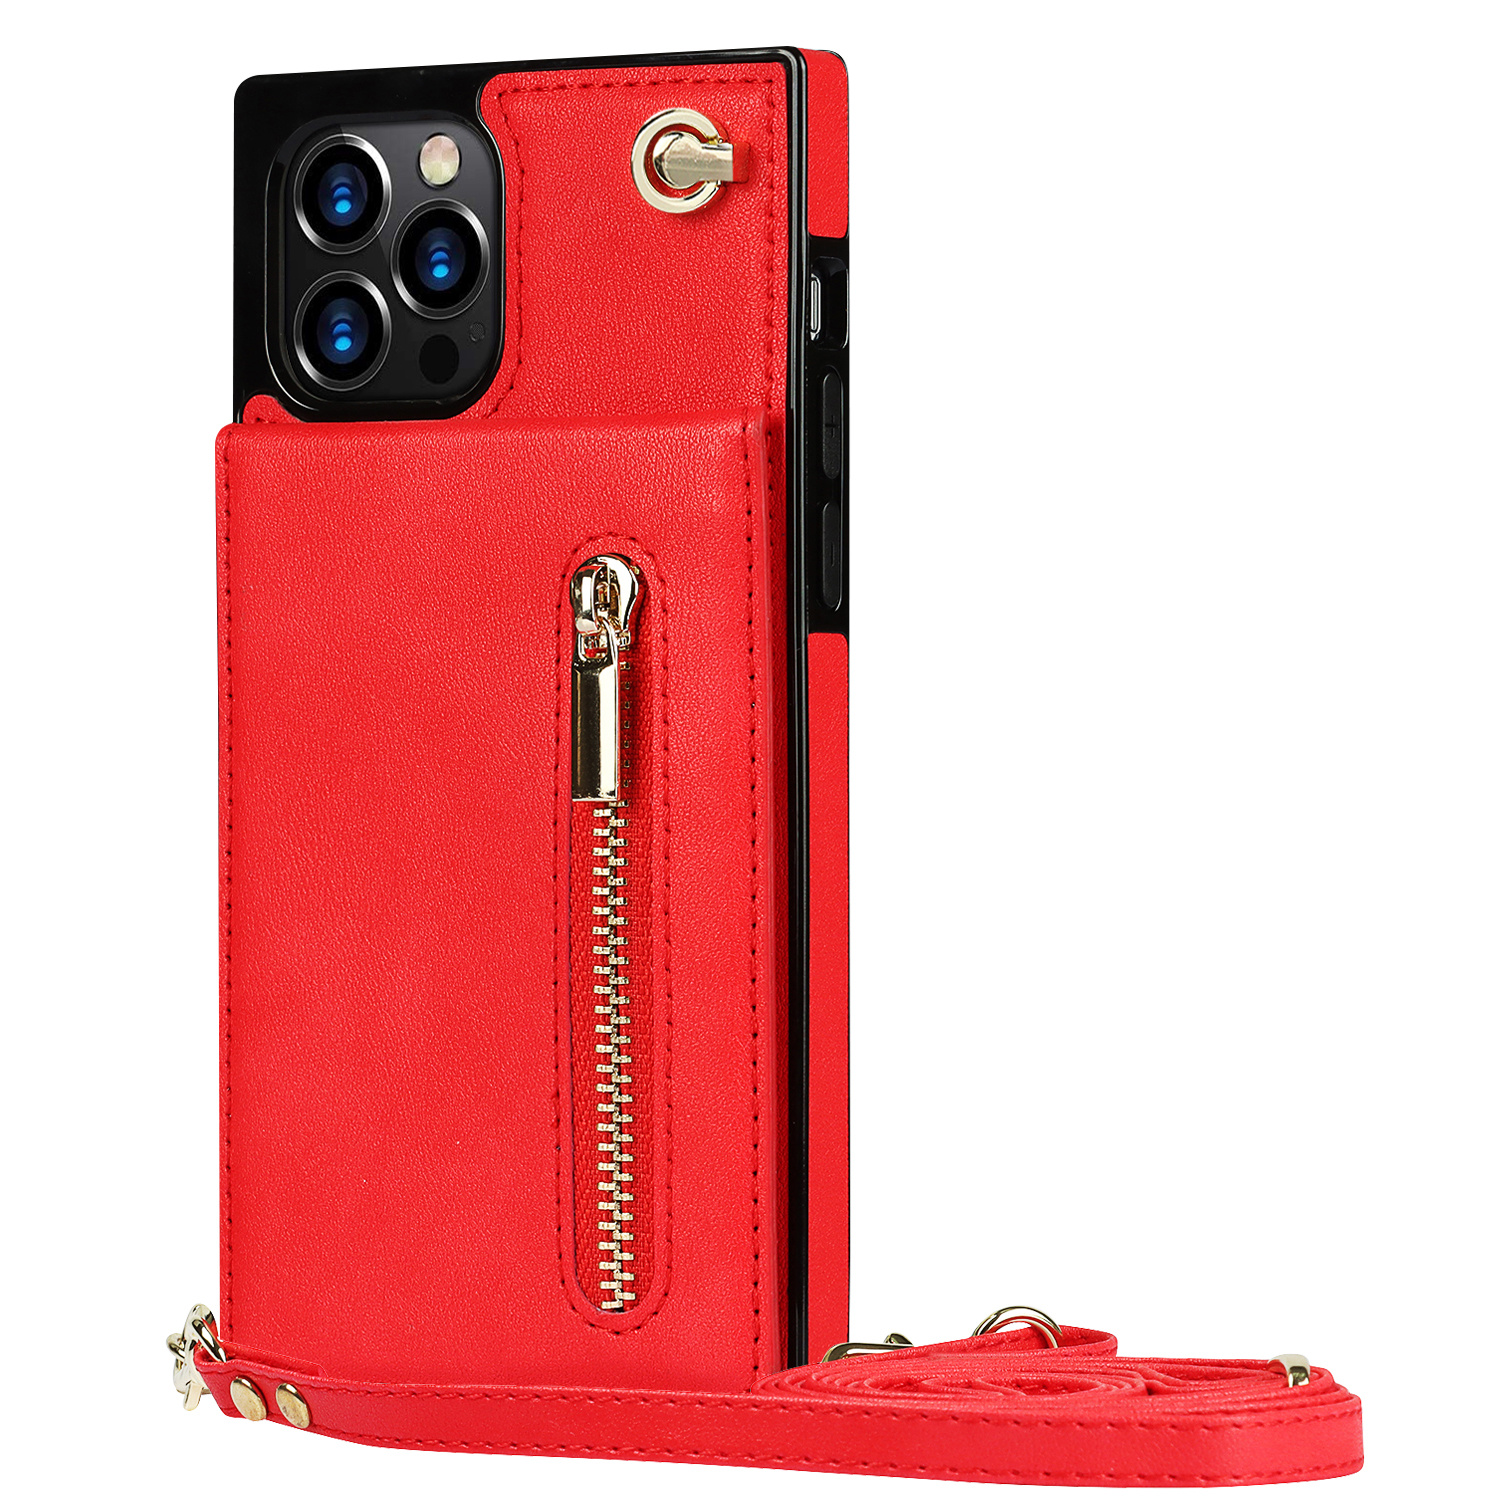 Samsung Galaxy S23 Ultra Back Cover Hoesje met Koord - Pasjeshouder - PU Leer - Koord - Samsung Galaxy S23 Ultra - Rood